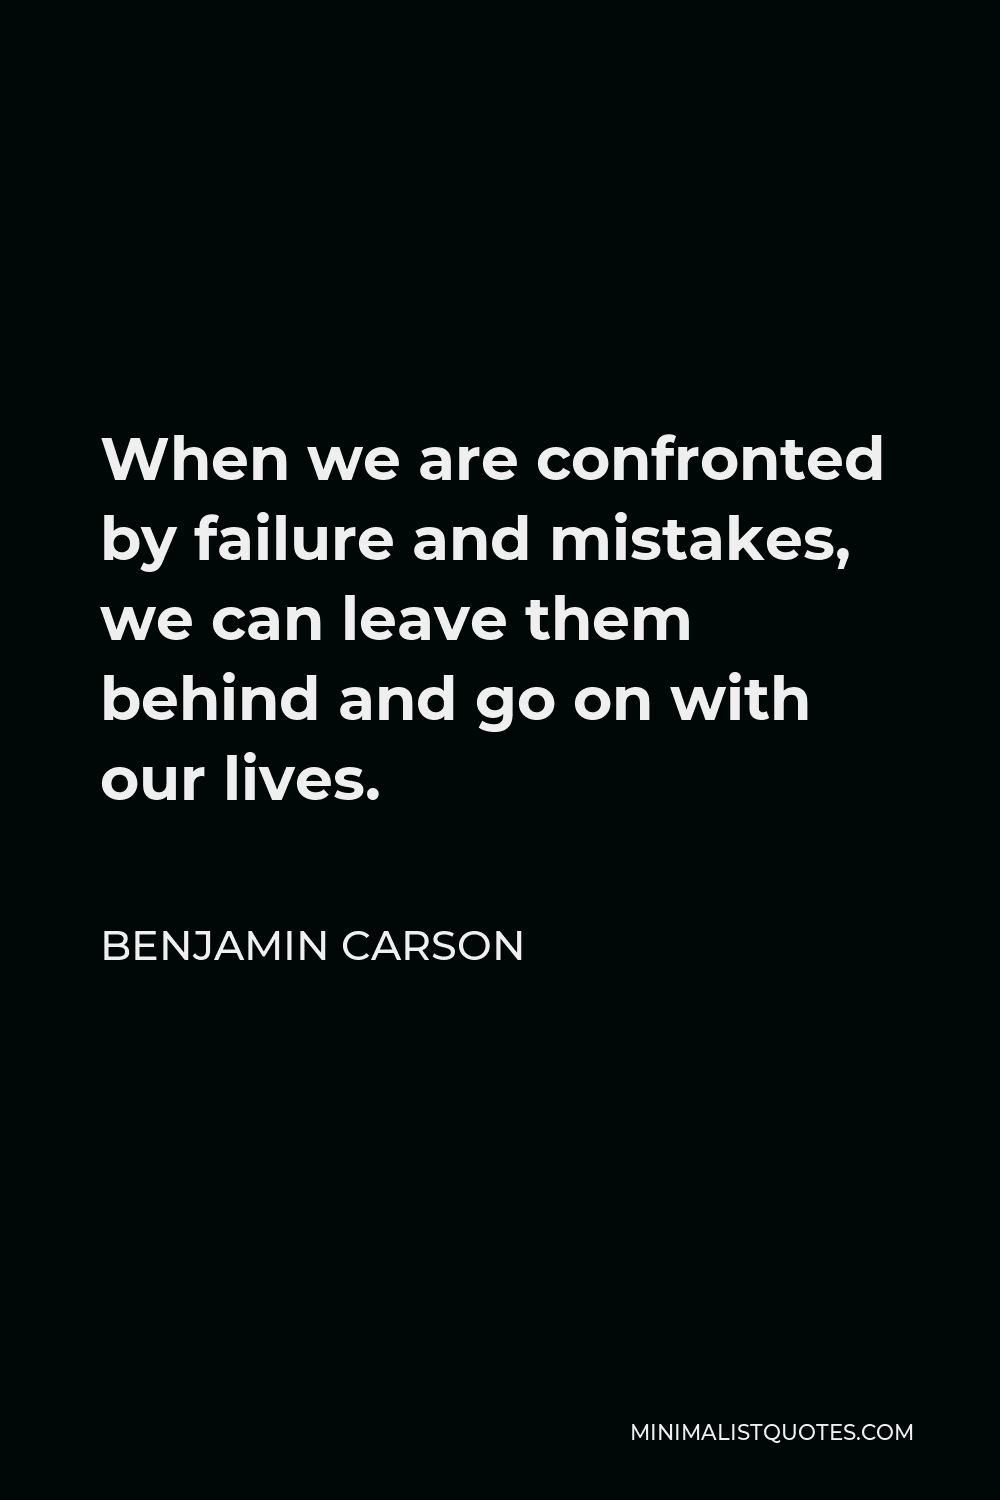 Benjamin Carson Quote - When we are confronted by failure and mistakes, we can leave them behind and go on with our lives.